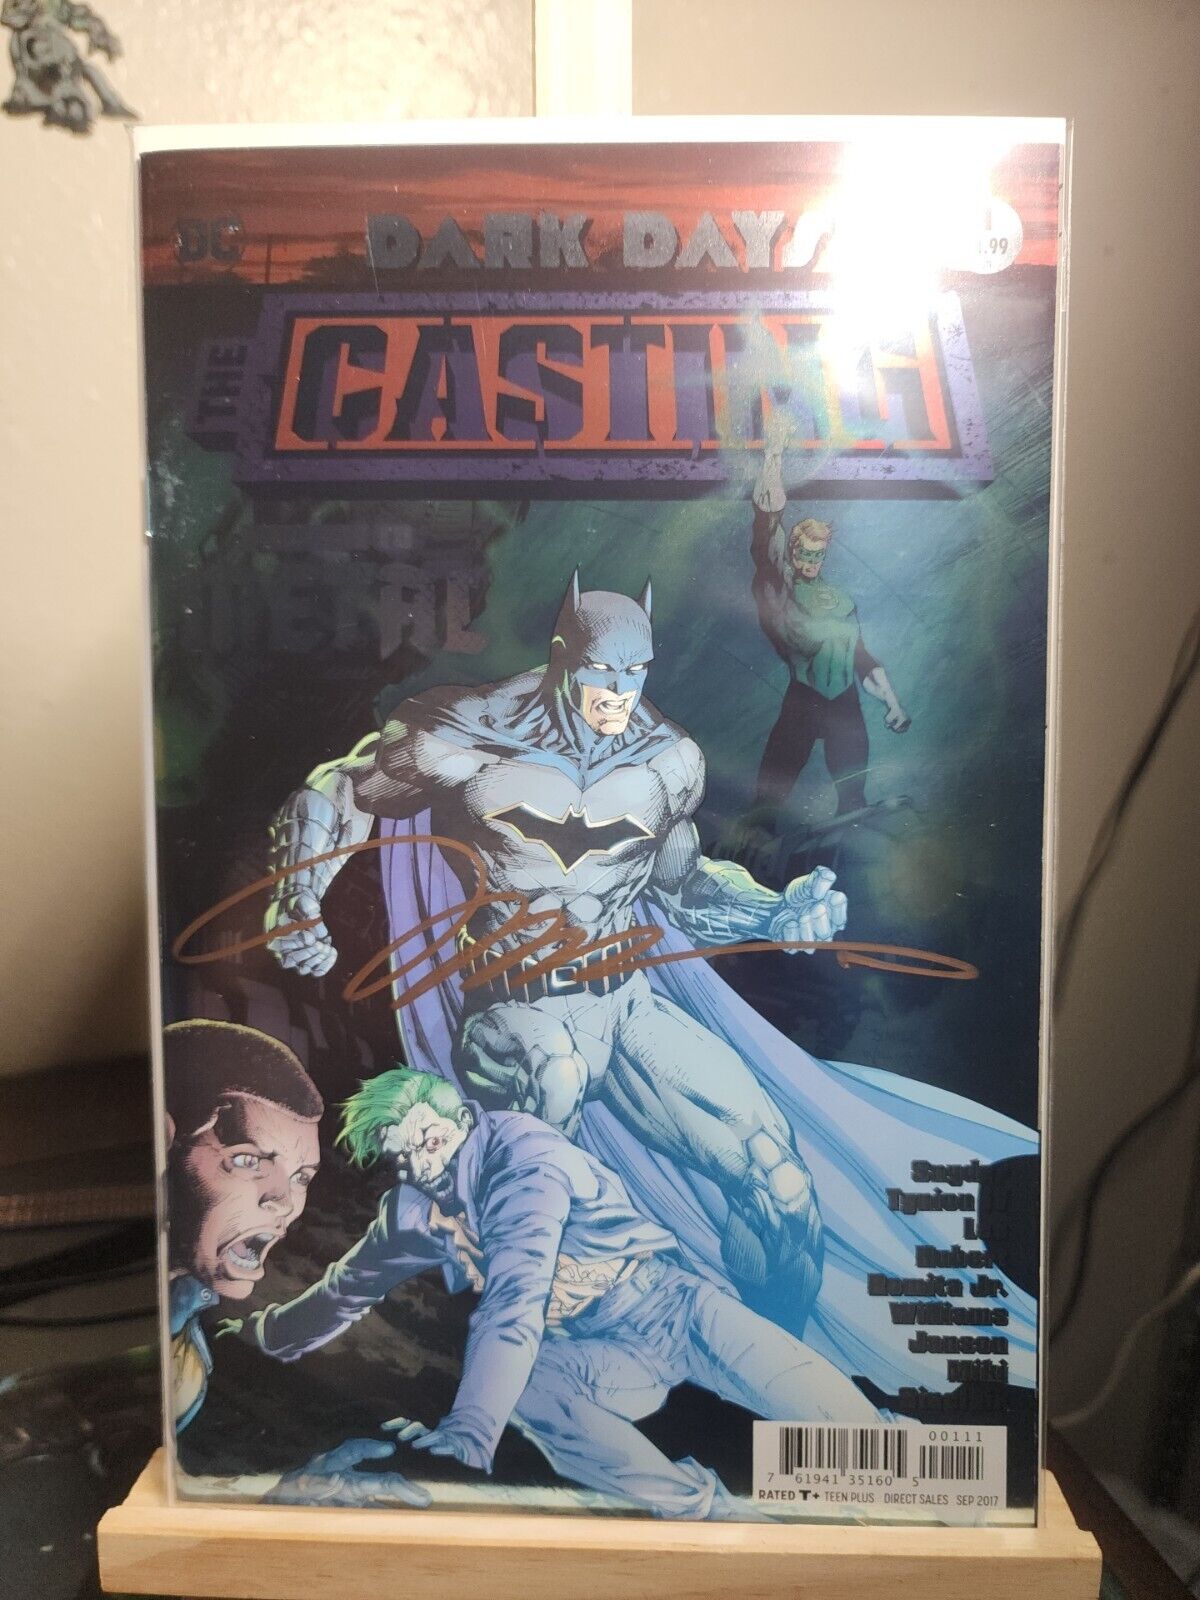 Dark Days The Casting 1 Signed By Jim Lee  Foil Stamped Cover 2017.